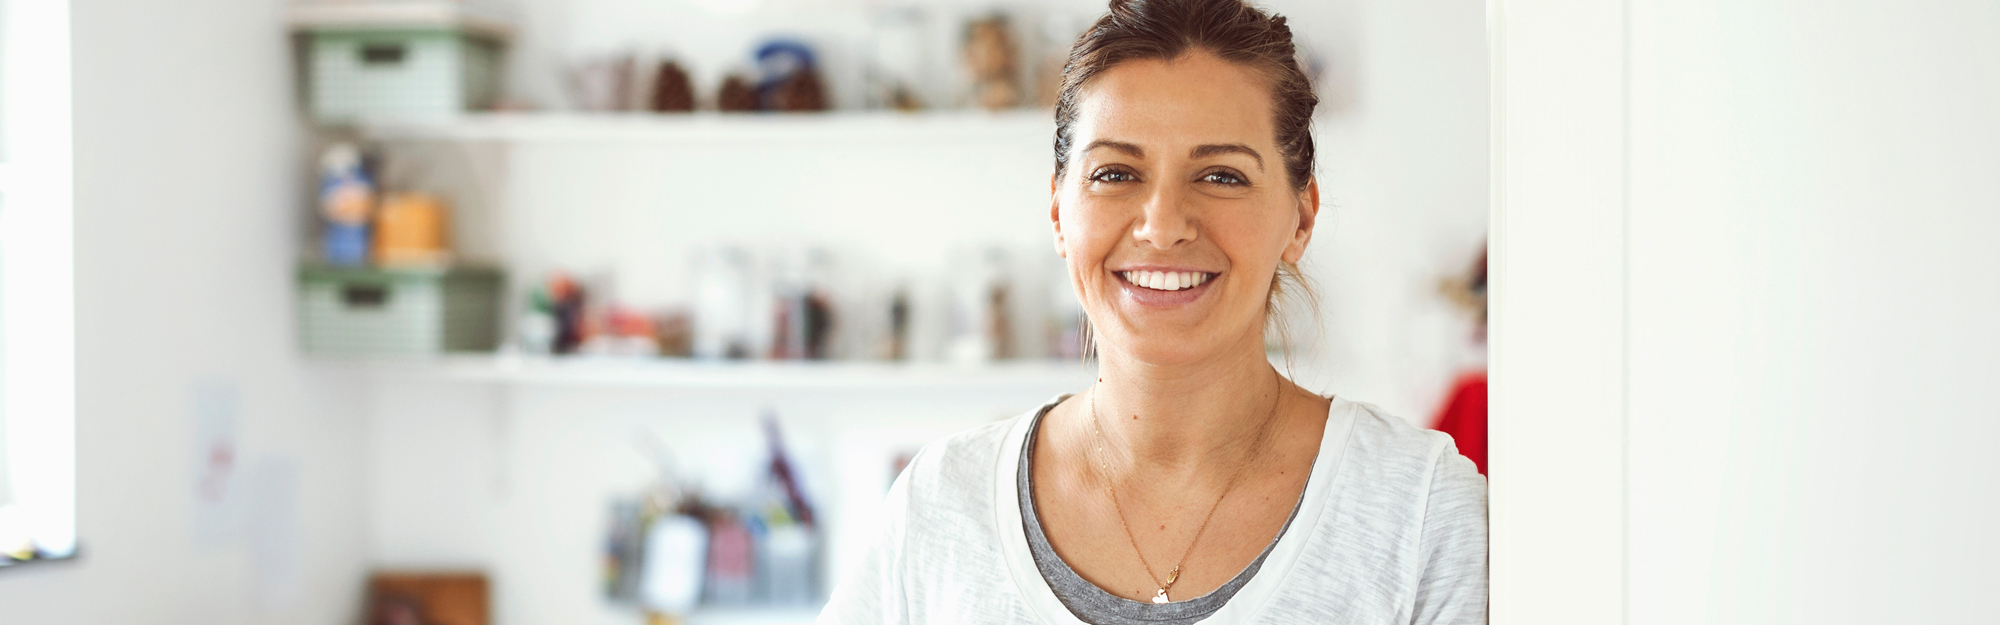 Smiling woman leaning shoulder against wall